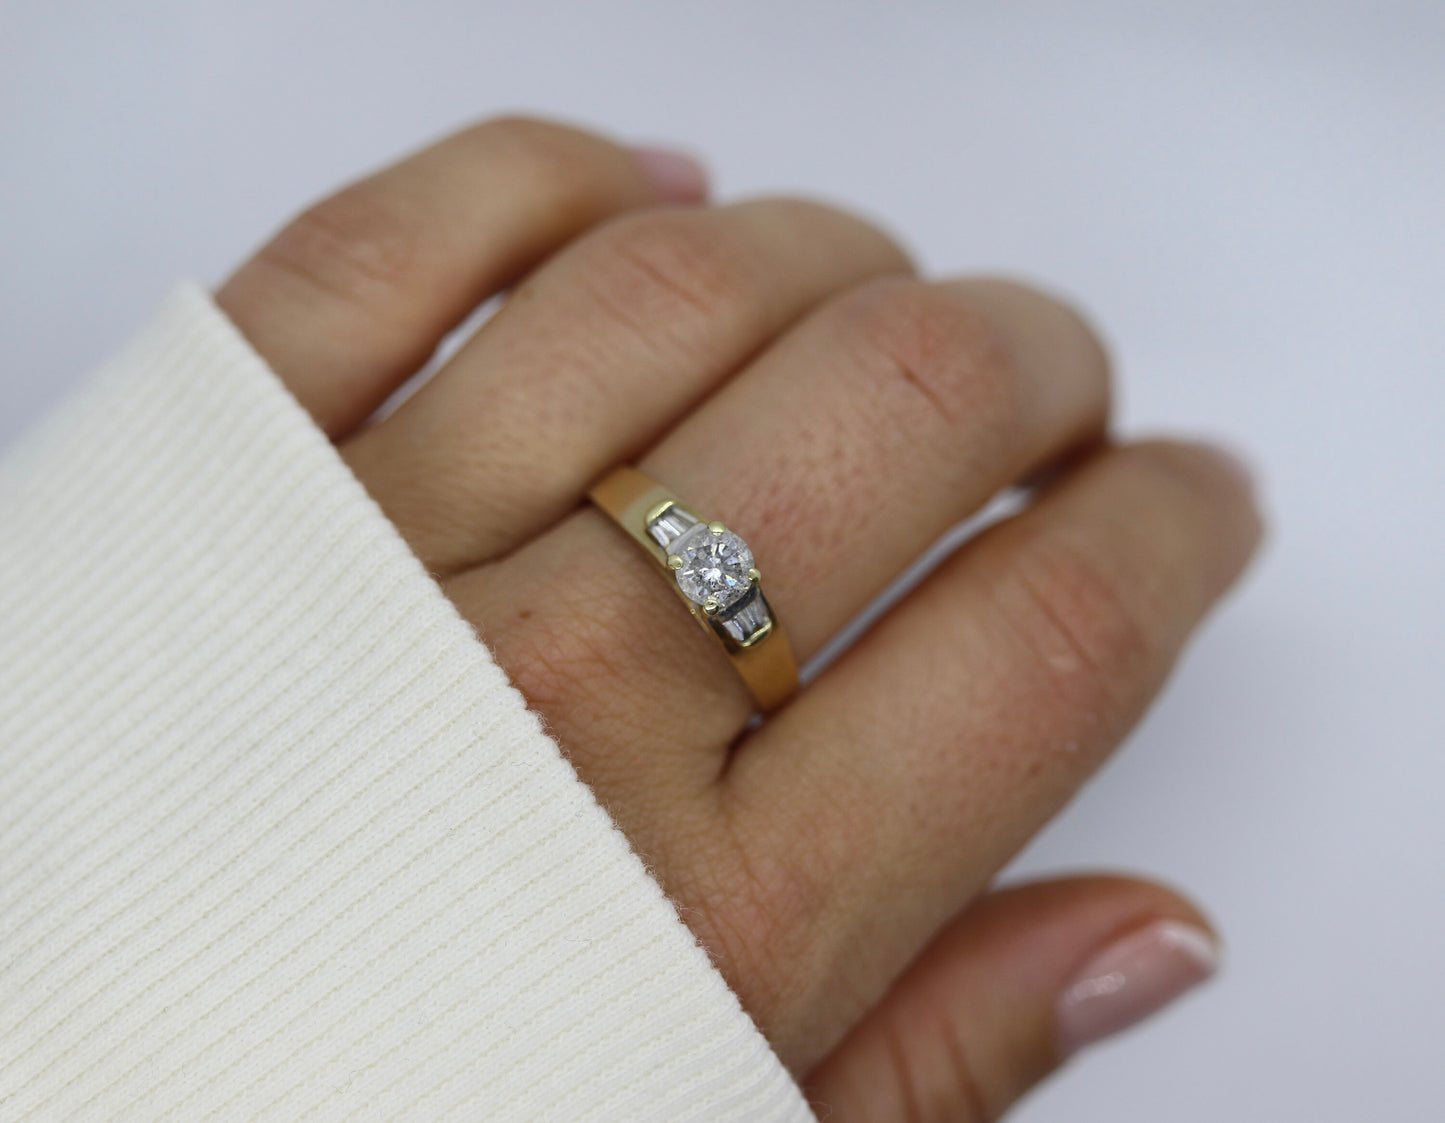 0.60ct Diamond Solitaire 14k ring with baguette accents. 14k Wedding band or Engagement ring.